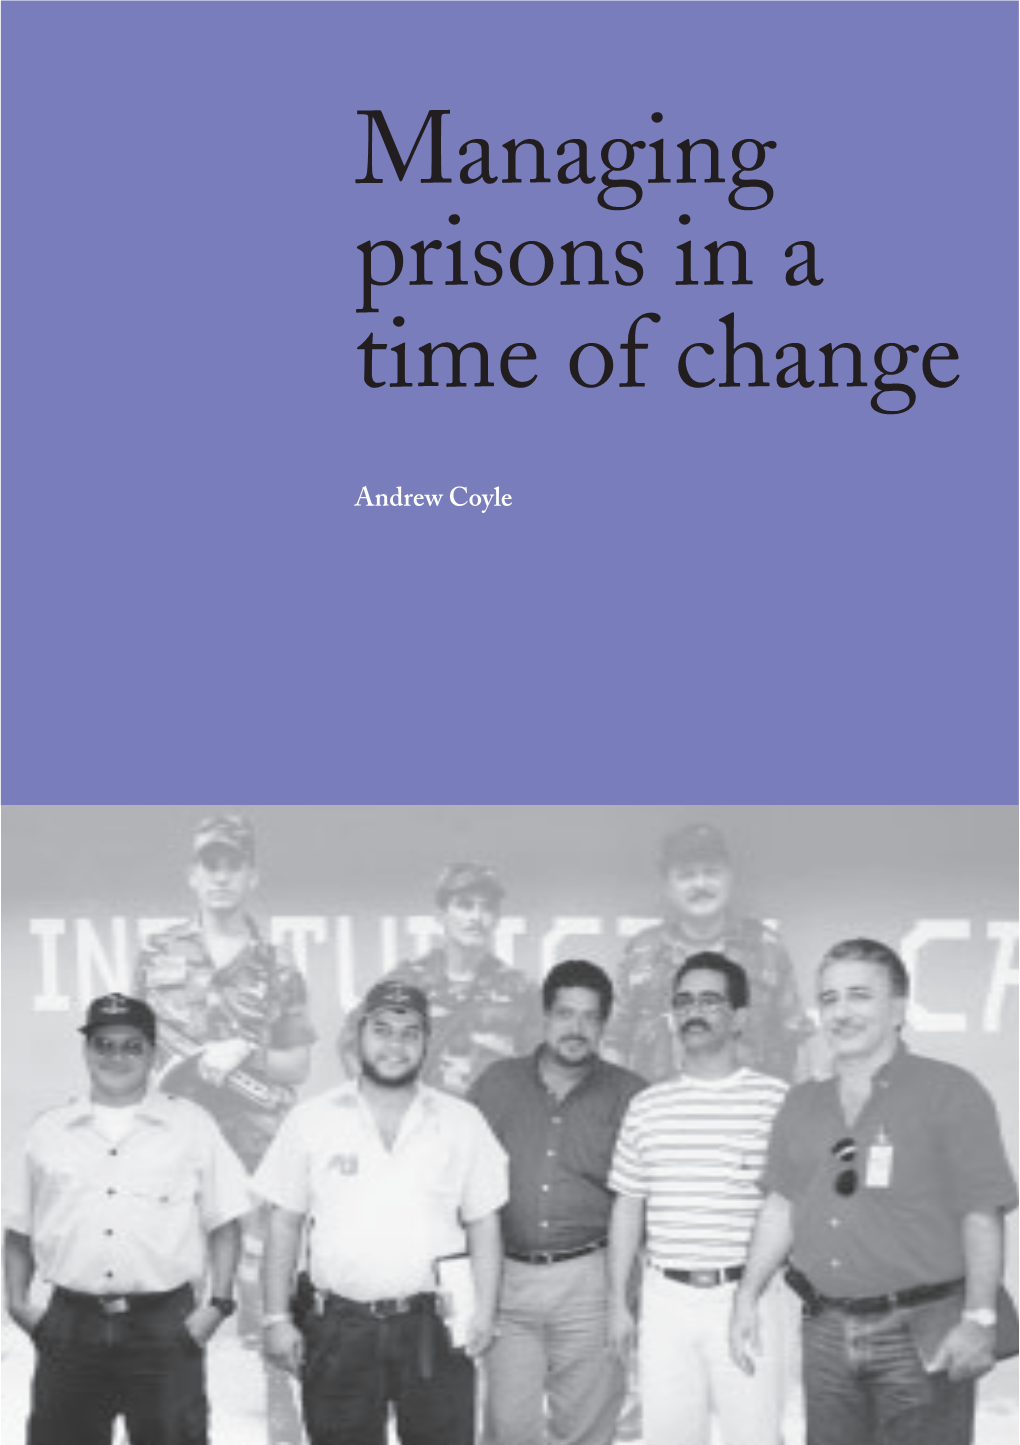 Managing Prisons in a Time of Change